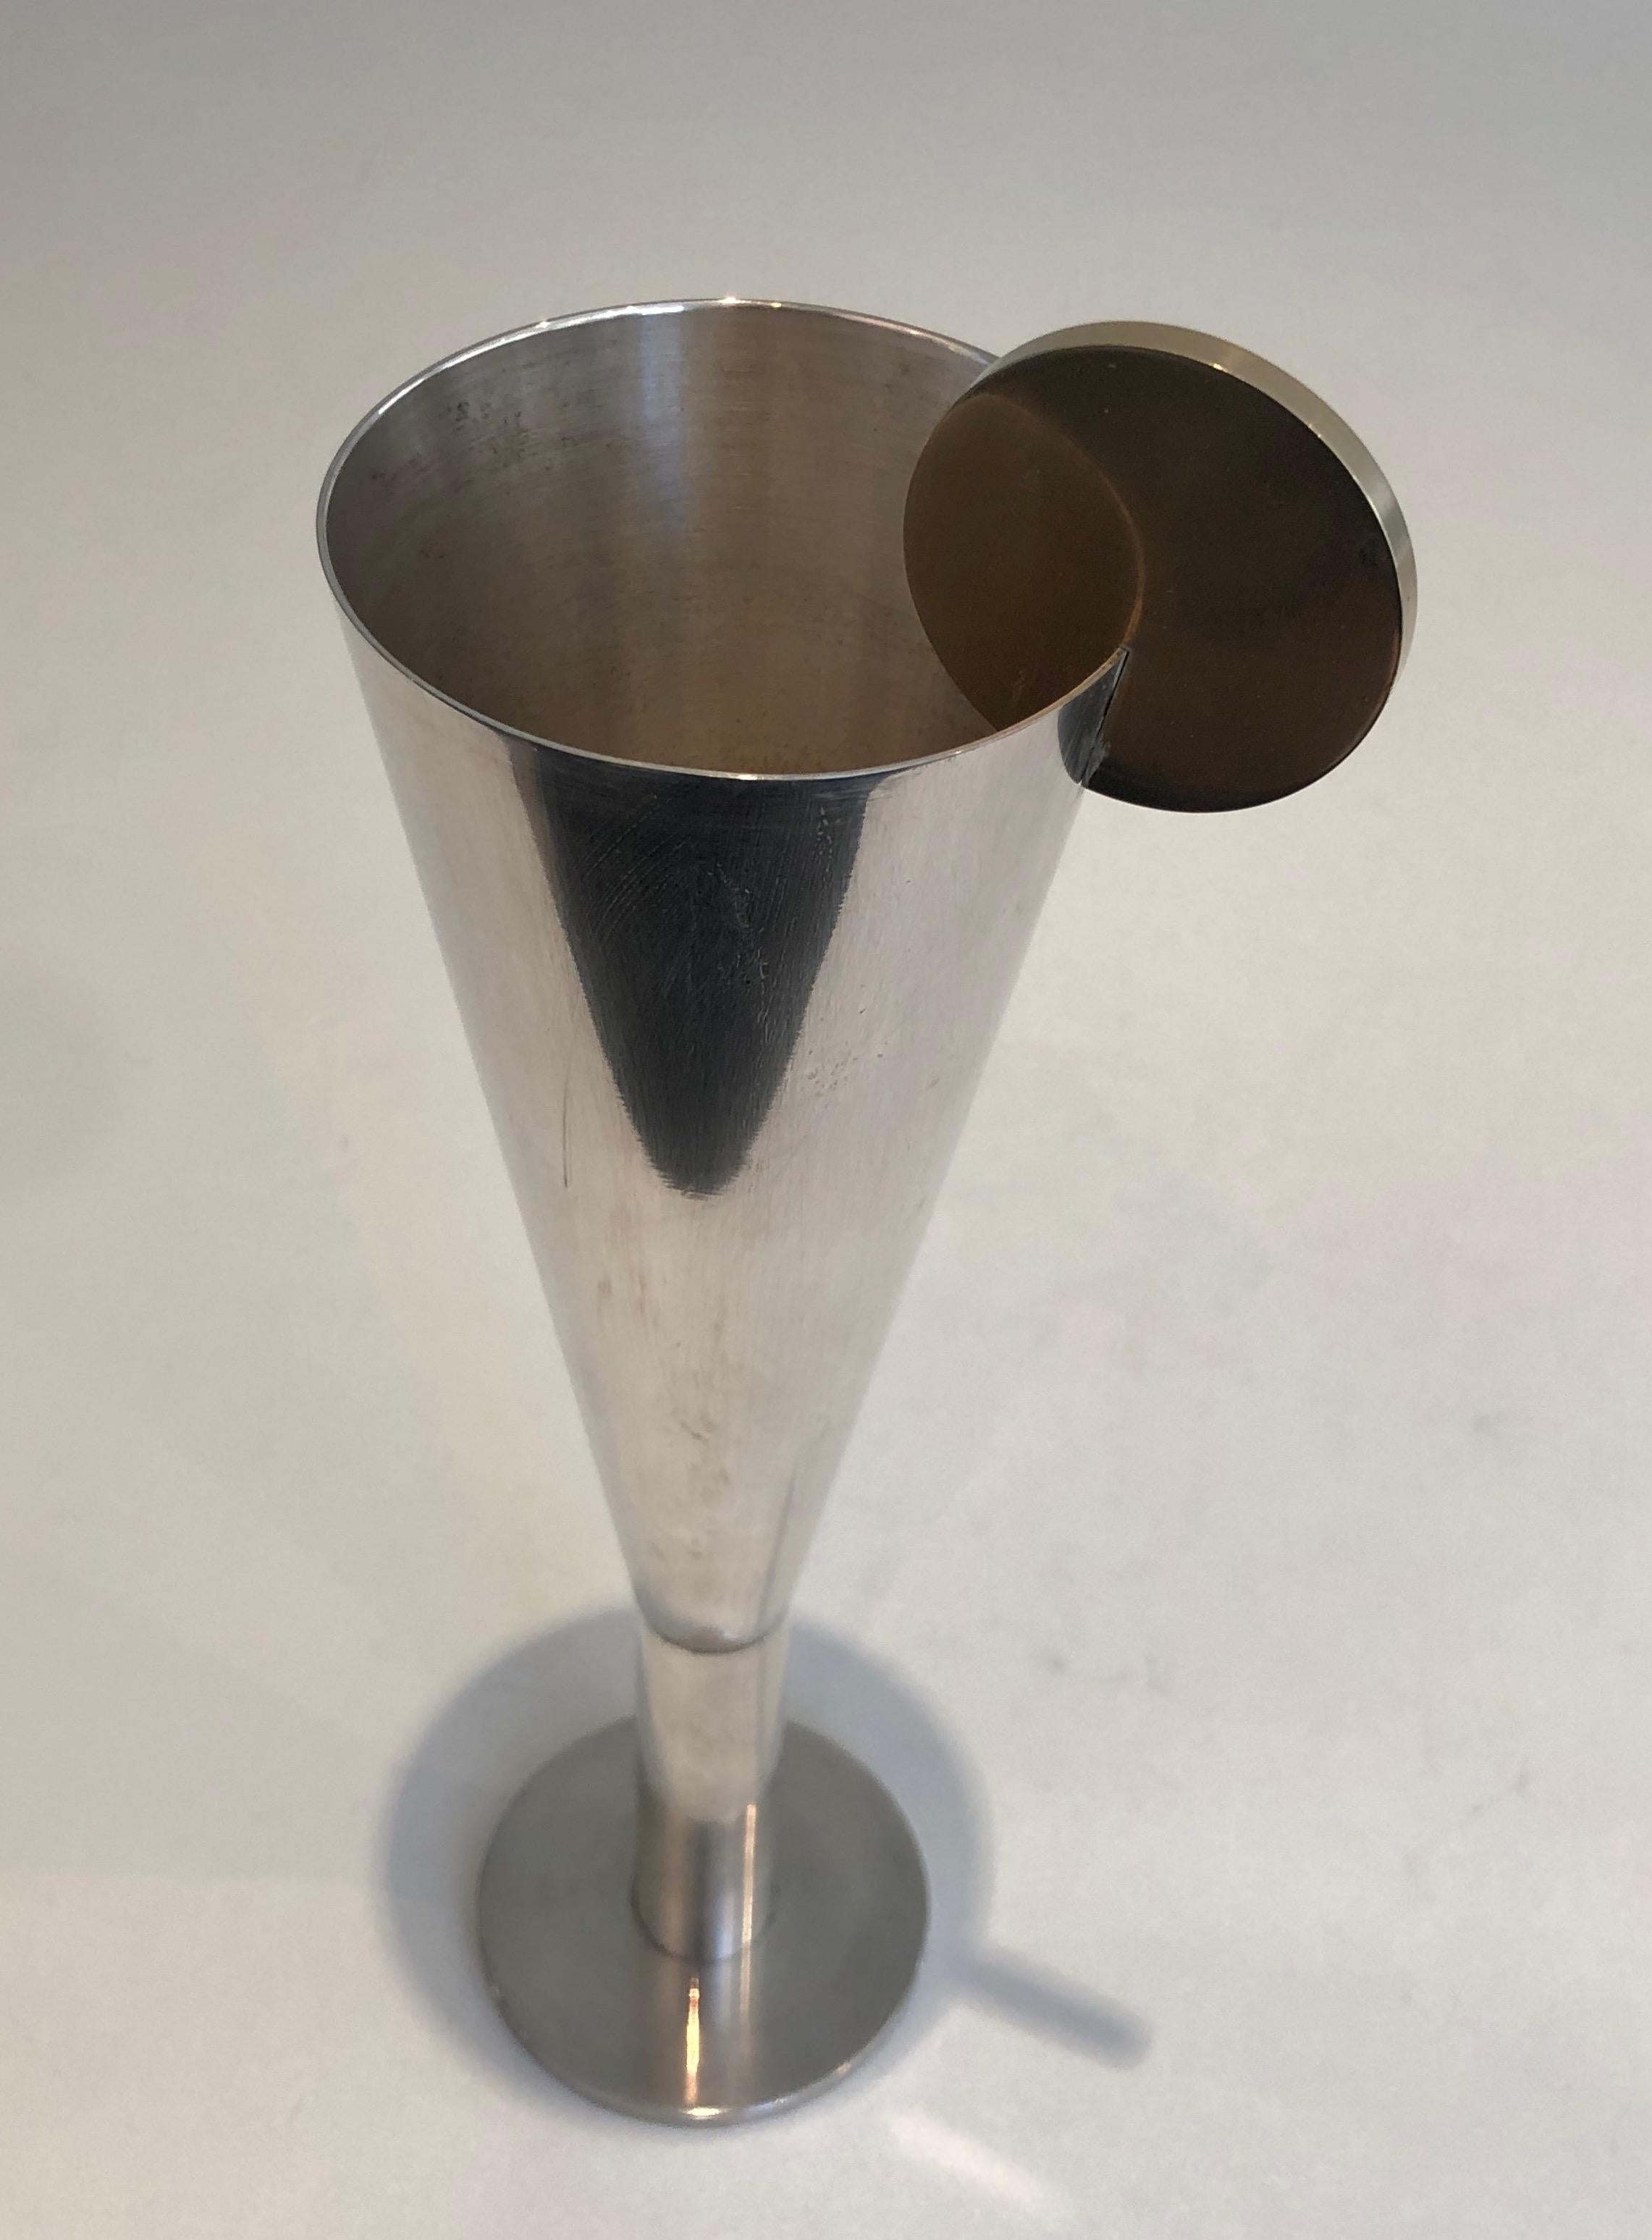 This rare champagne flute is made of silver plated with a brass lemon. This is an Italian work, signed by .A.Pozzi. and marked Padova A.Pozzi. circa 1950.